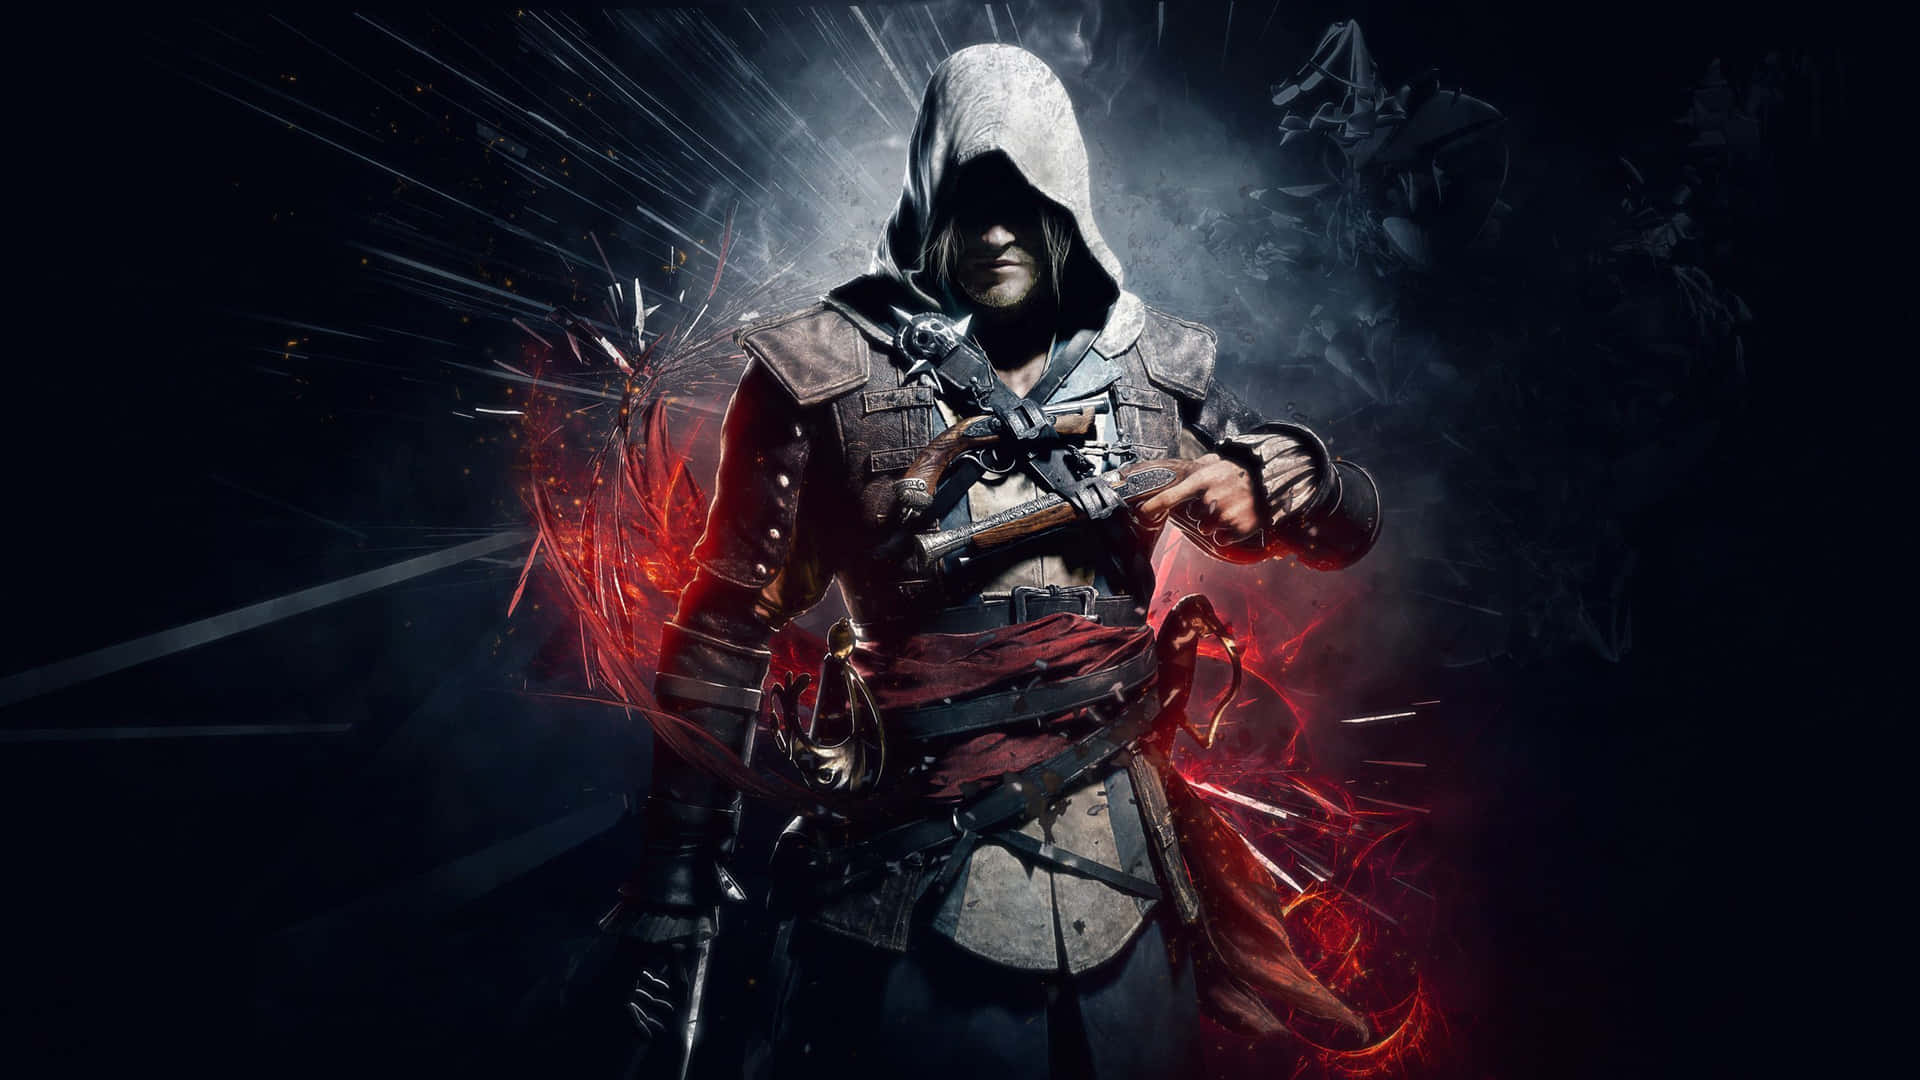 Cool Ps4 Character Edward Kenway From Assassin's Creed Iv: Black Flag Background